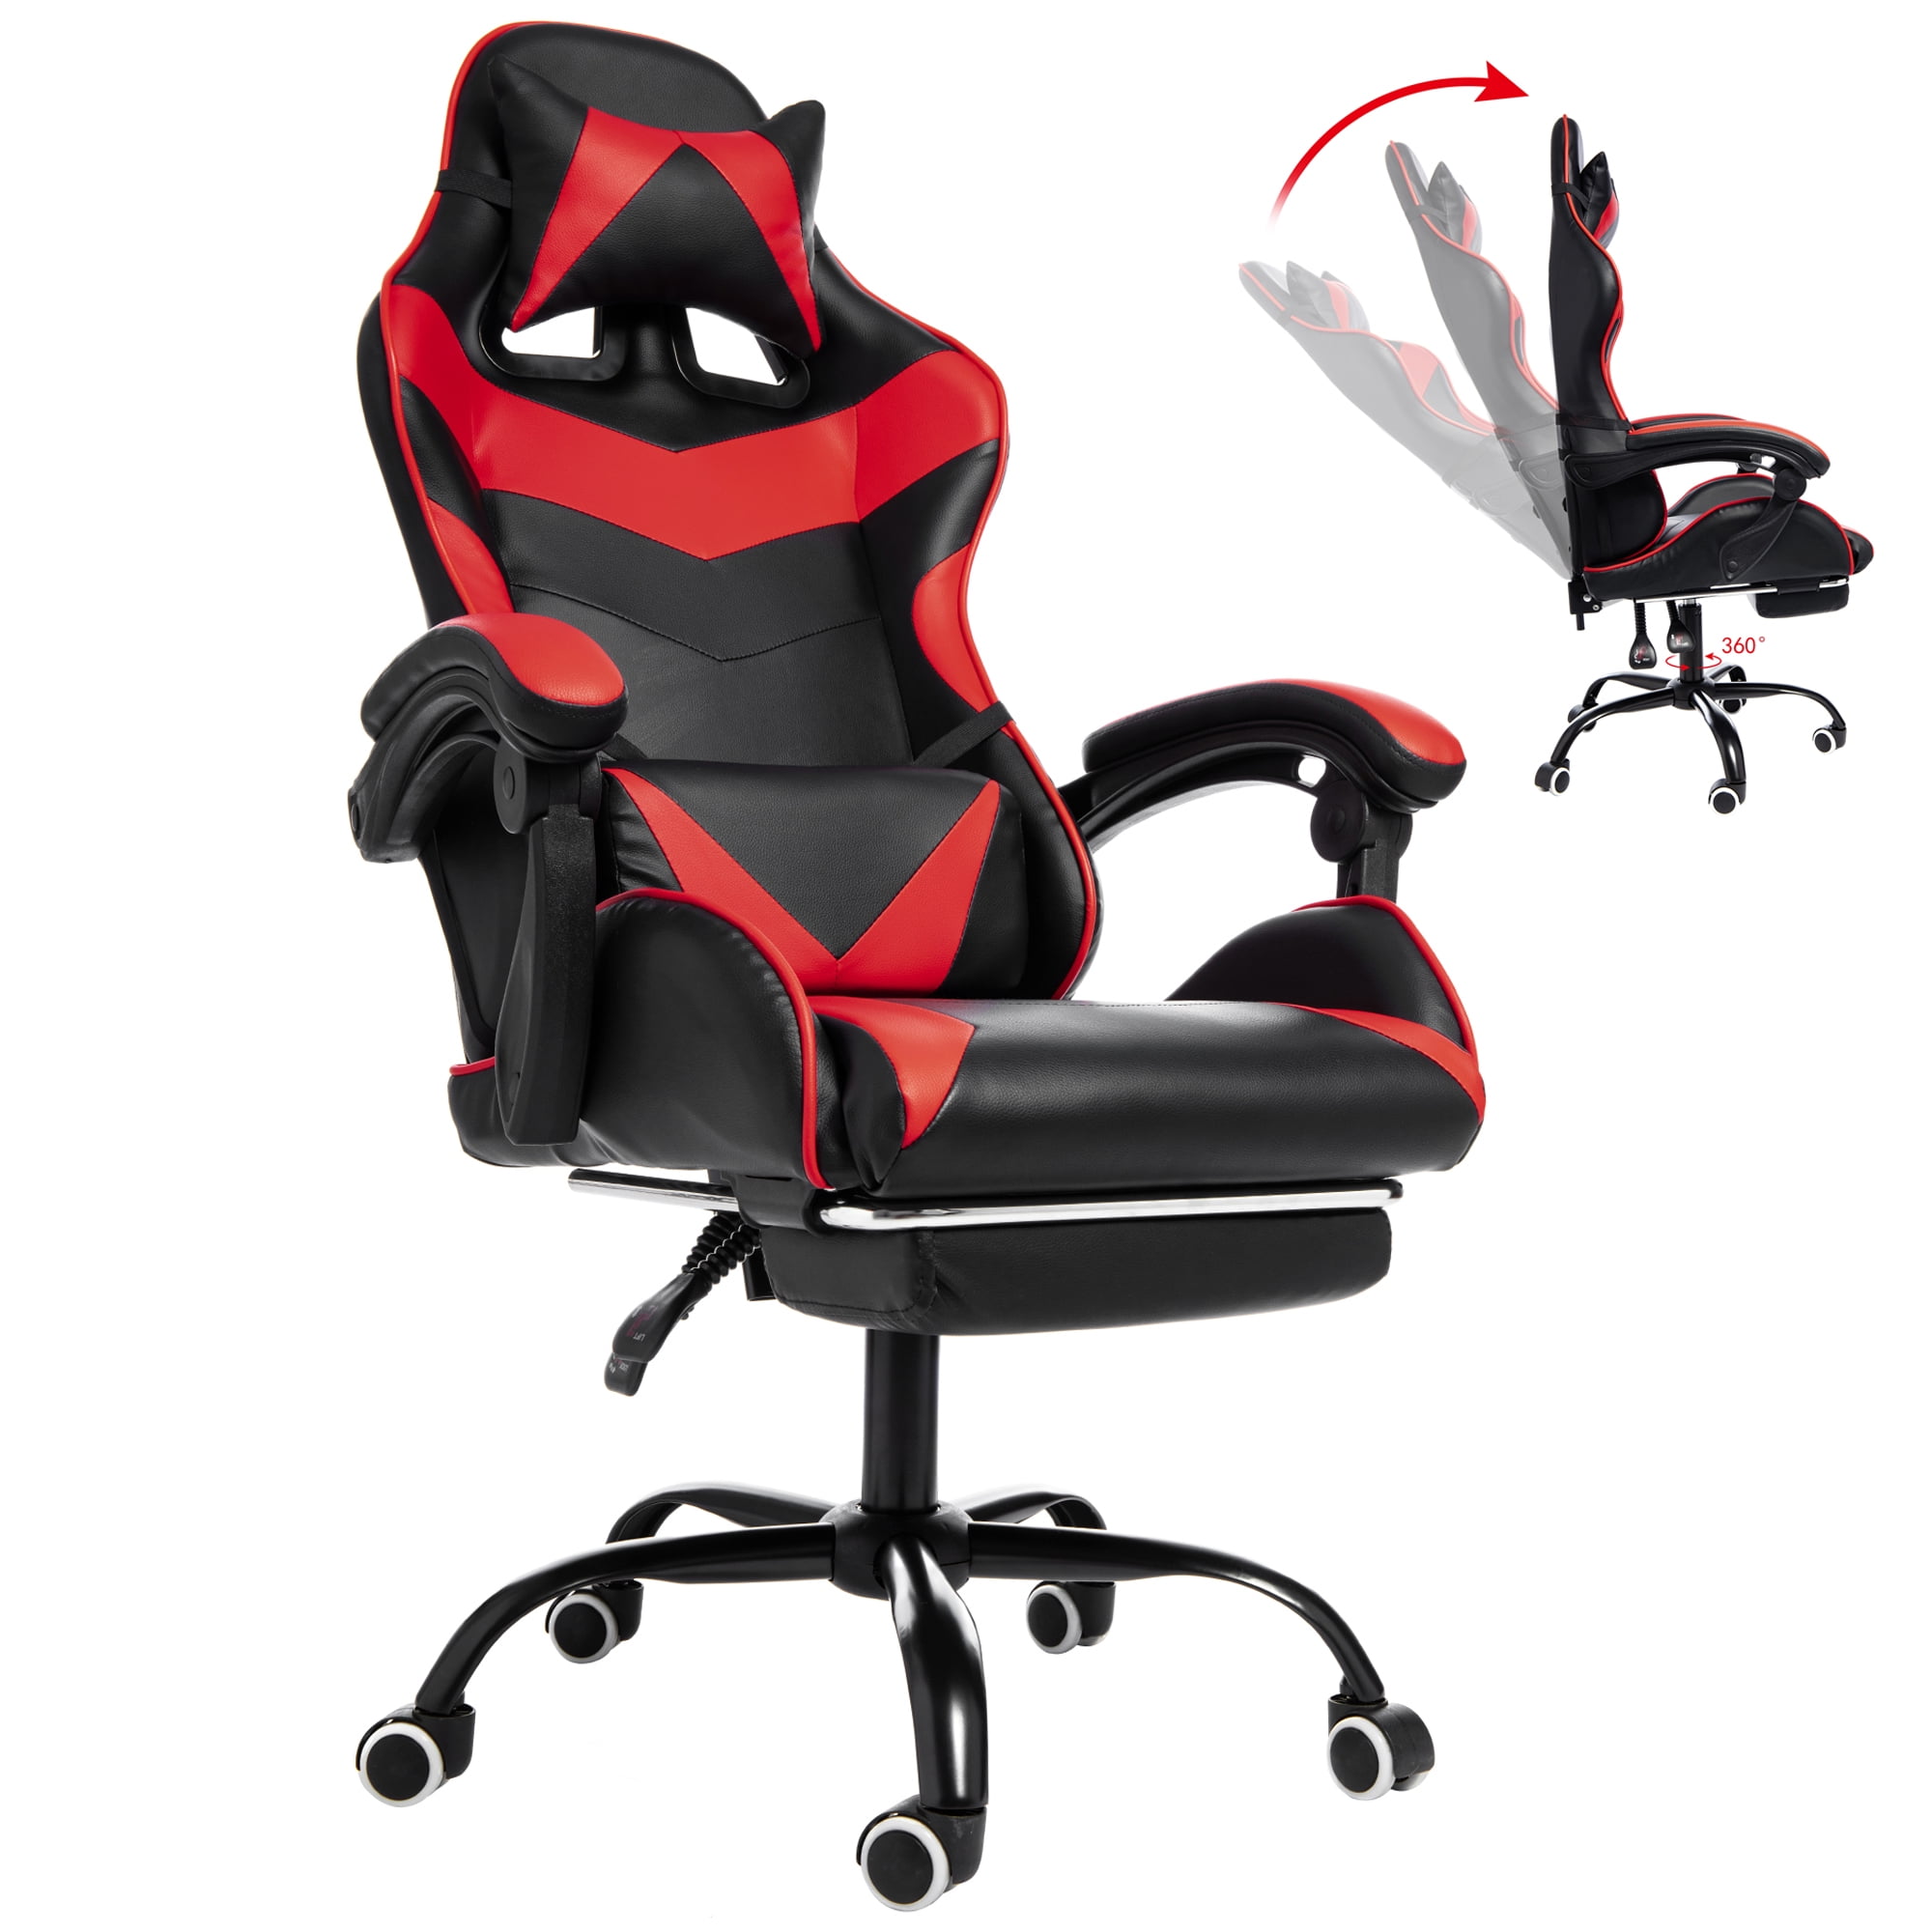 YouLoveIt Gaming Chair High Back Recliner Office Chair Computer Racing